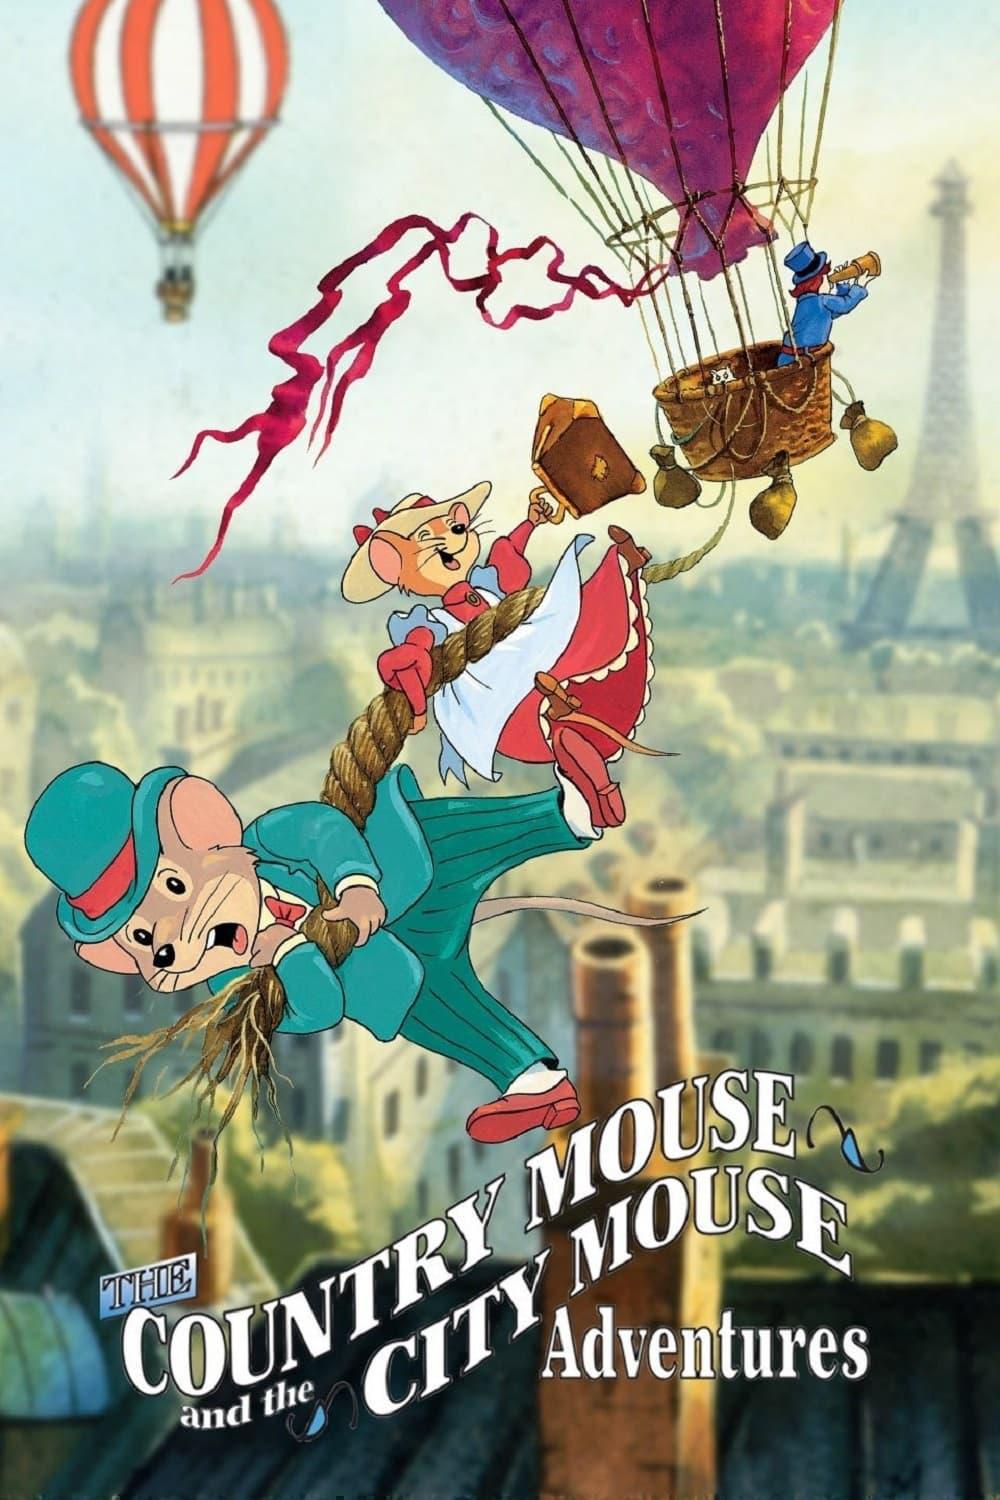 TV ratings for The Country Mouse And The City Mouse Adventures (Souris Des Villes, Souris Des Champs) in Suecia. France 3 TV series